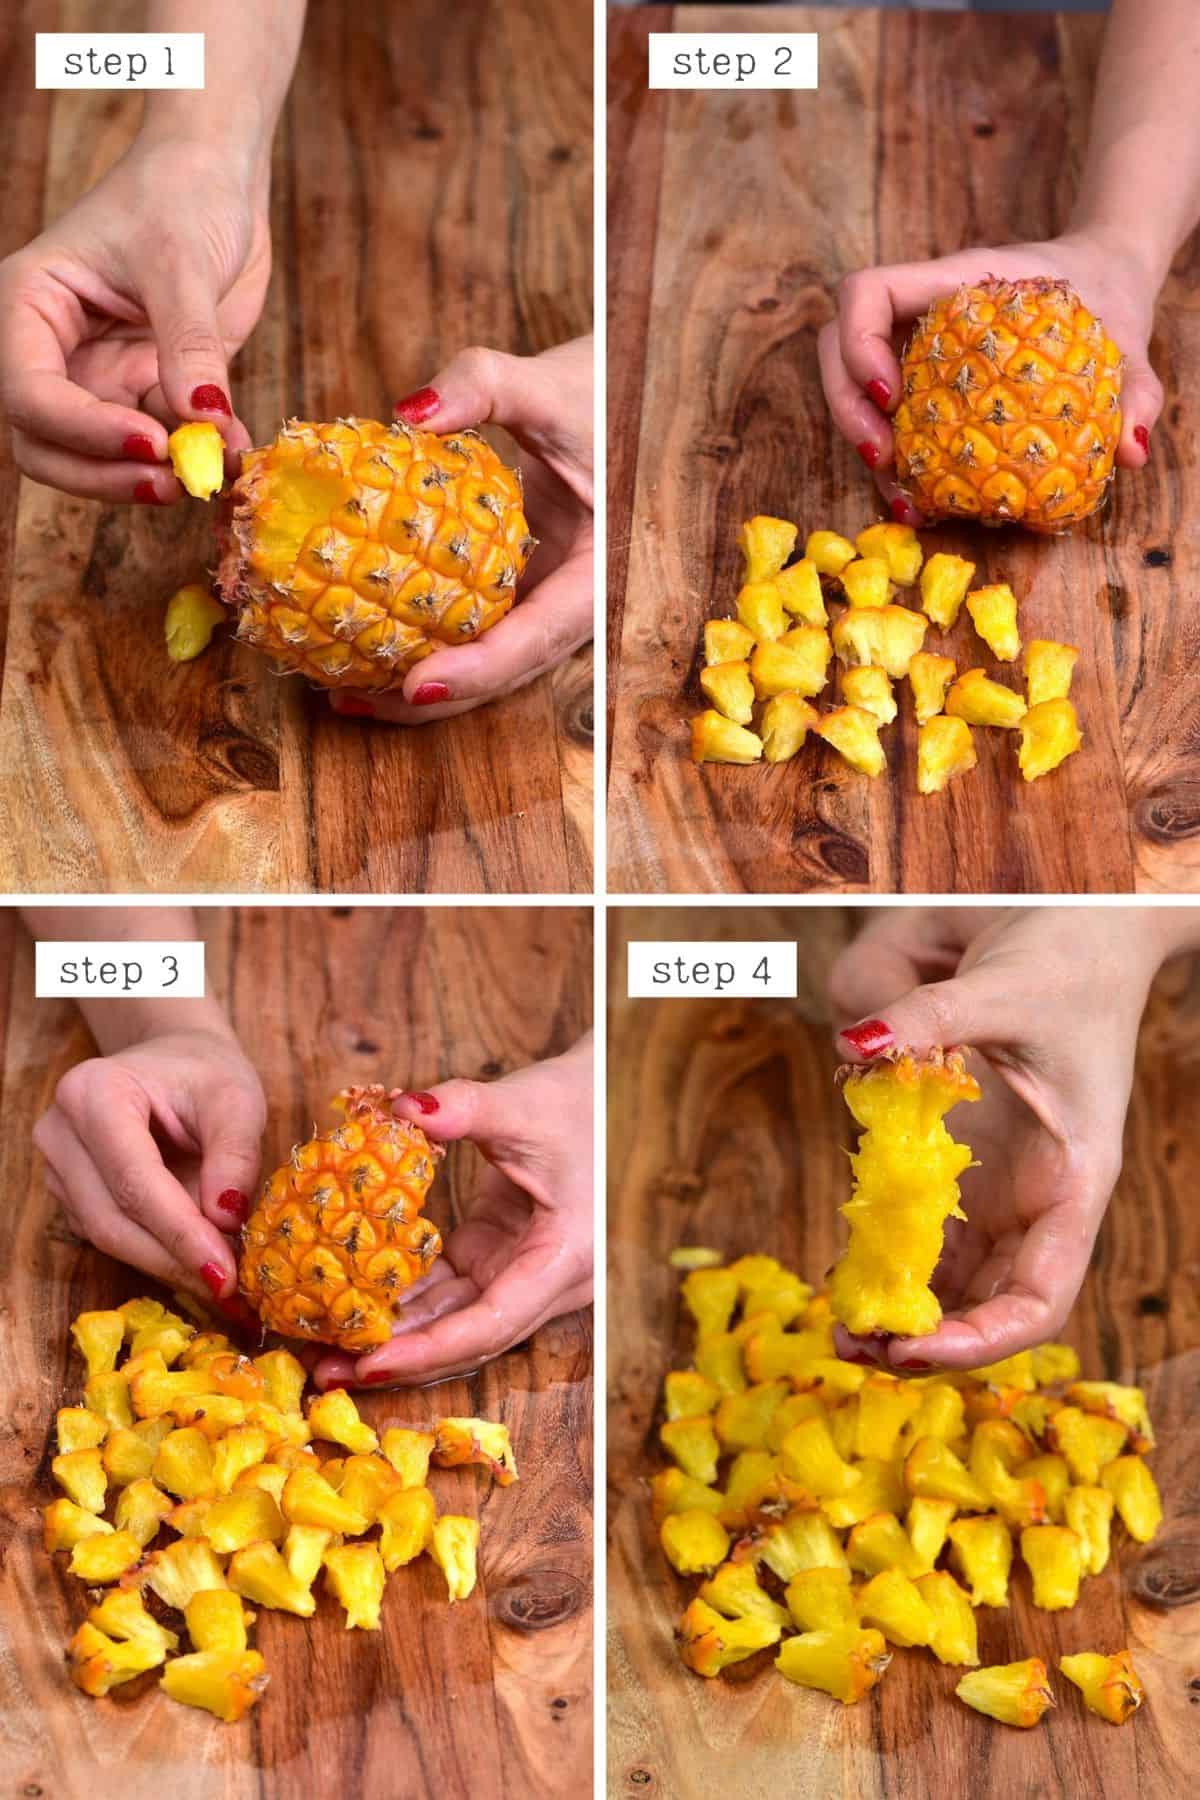 Steps for opening a pineapple